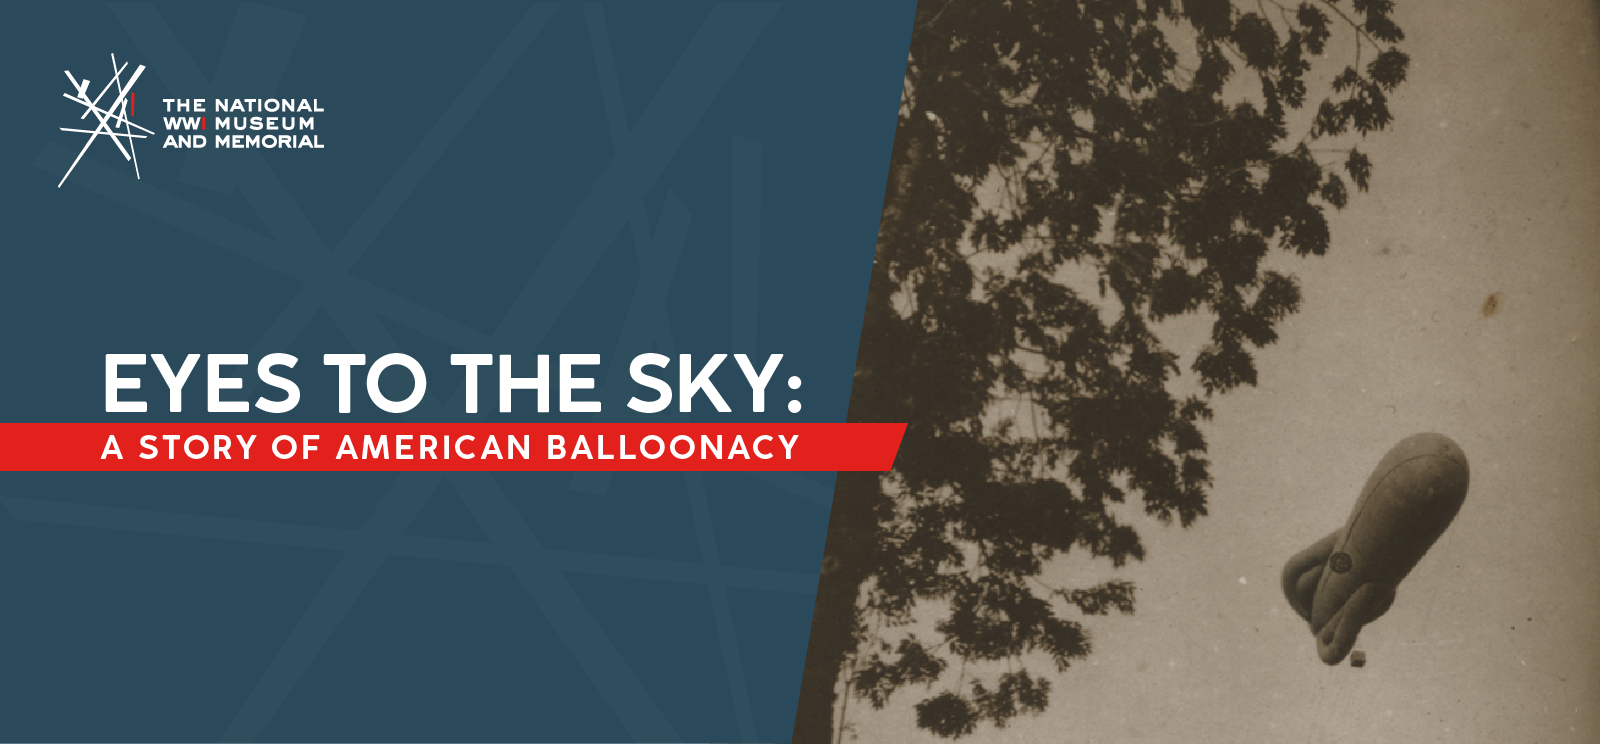 Image: Black and white photograph of a large 'sausage-type' balloon flying high above the viewer on the ground. Text: 'Eyes to the Sky: / A Story of American Balloonacy'